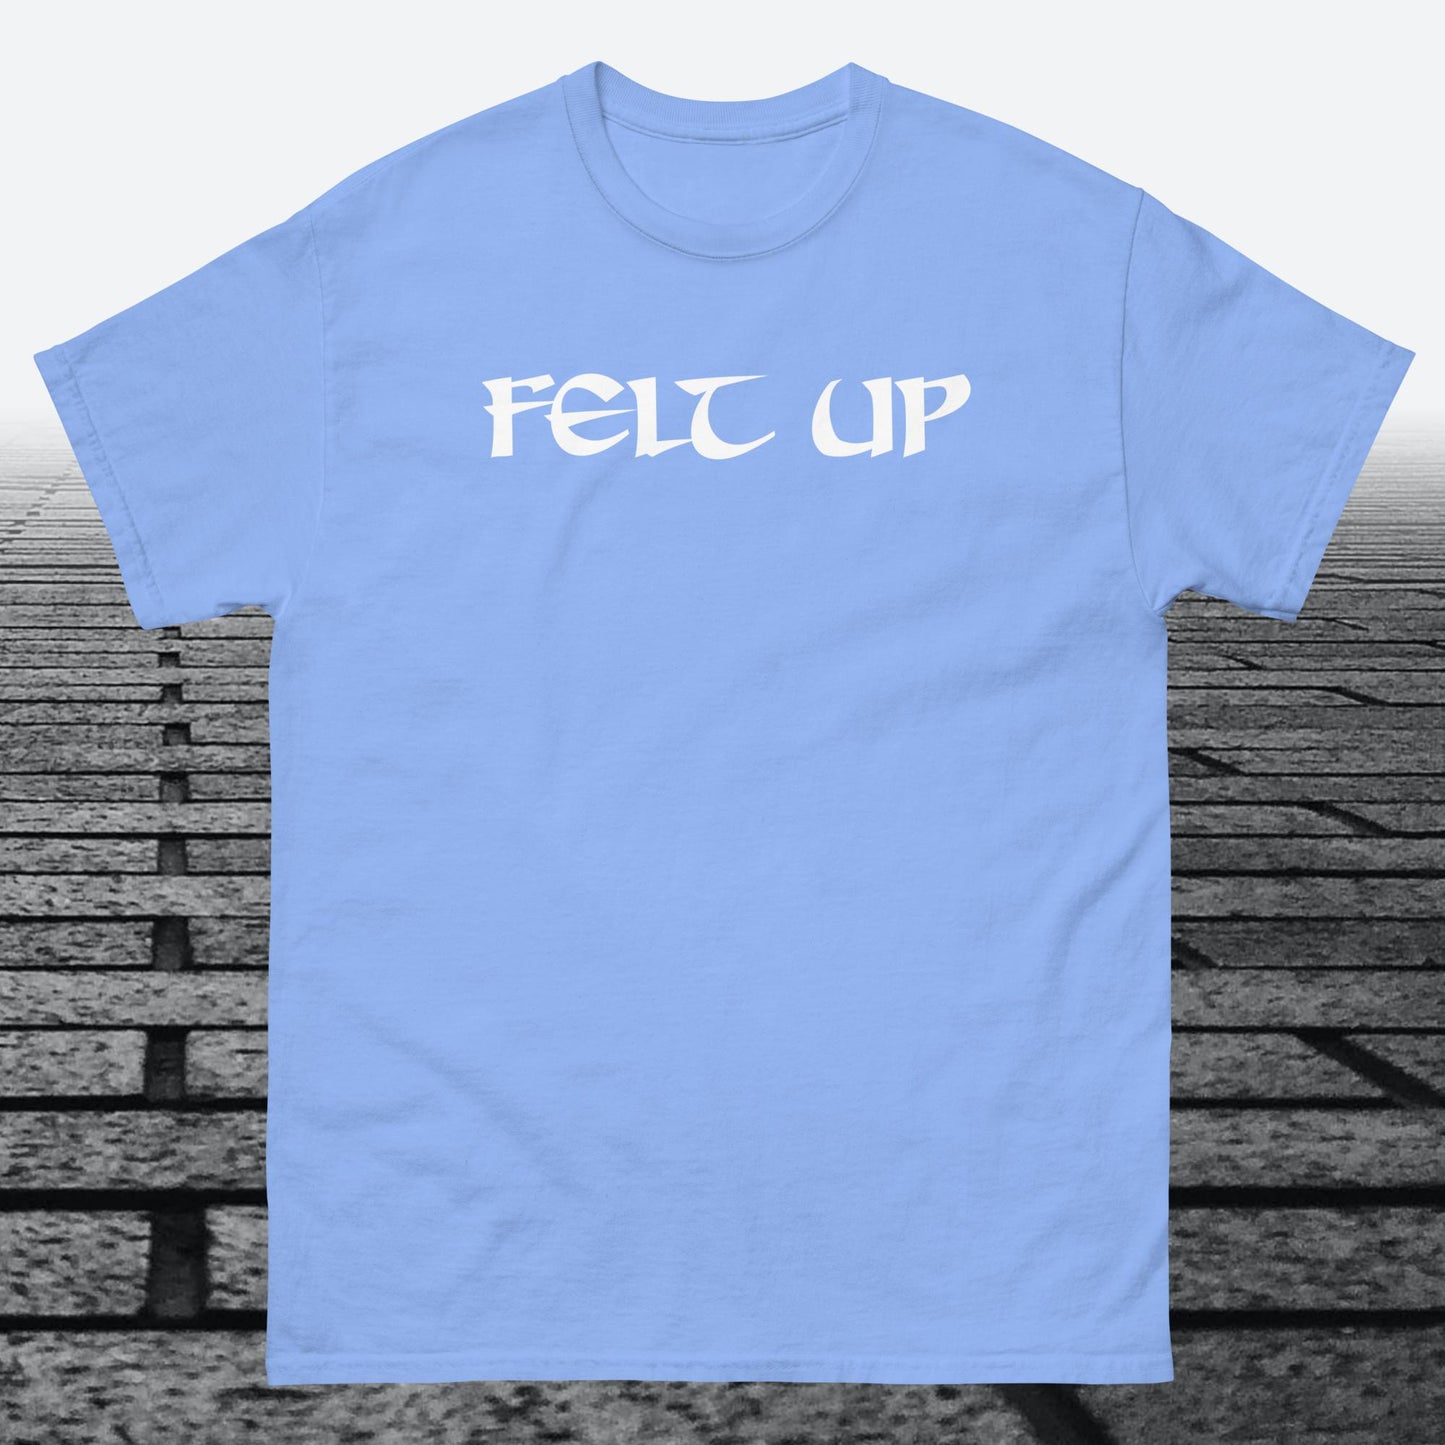 Felt Up, with logo on the back, Cotton t-shirt